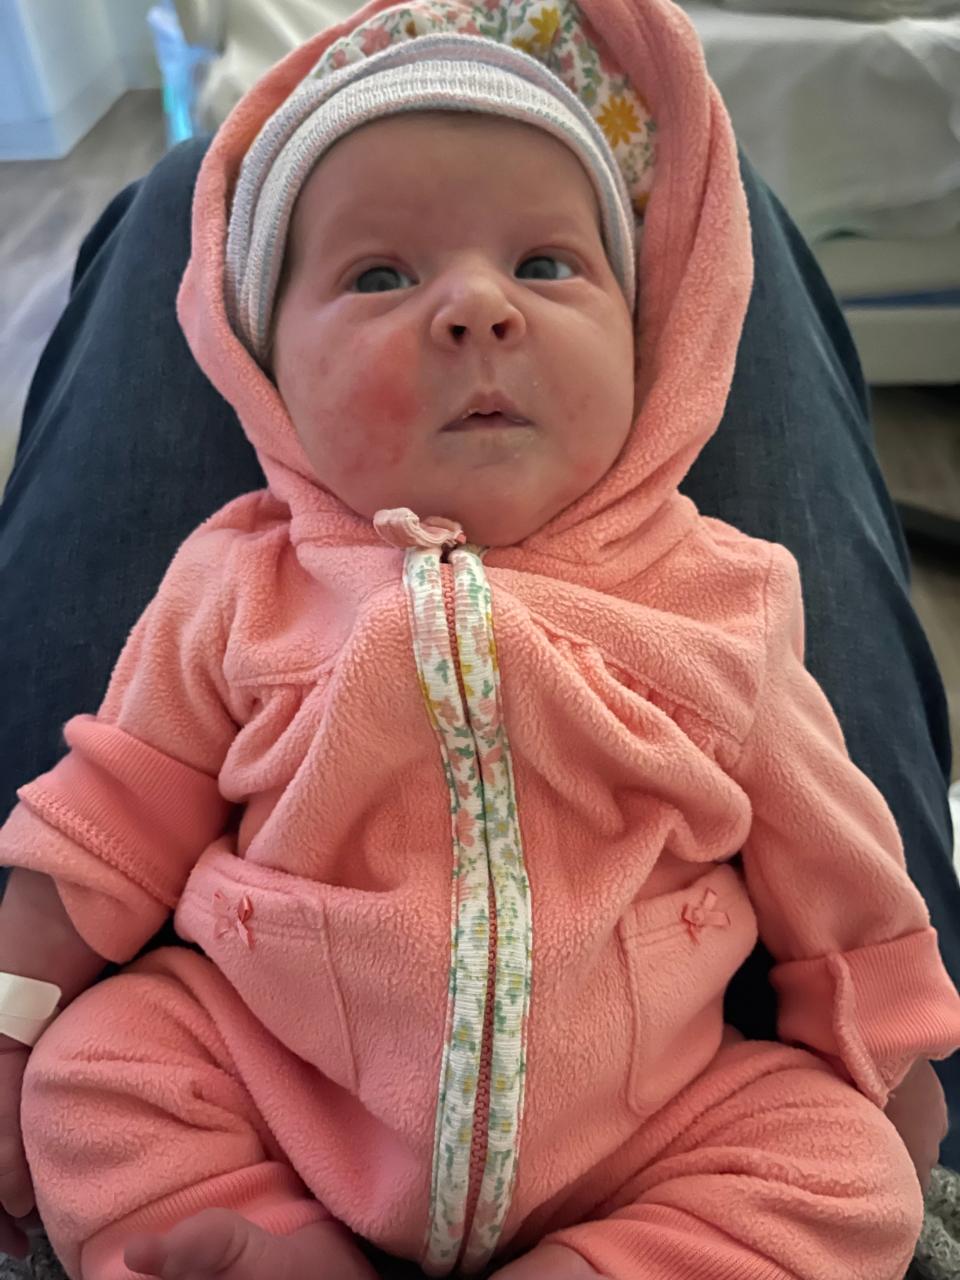 This 7-pound, 7-ounce baby girl was born via C-section at IU Health Bloomington Hospital Dec. 26, just a few hours after her mother, who had been living outdoors in a tent, checked out of a local motel. She had spent three days there out of the below-zero weather at Christmas.